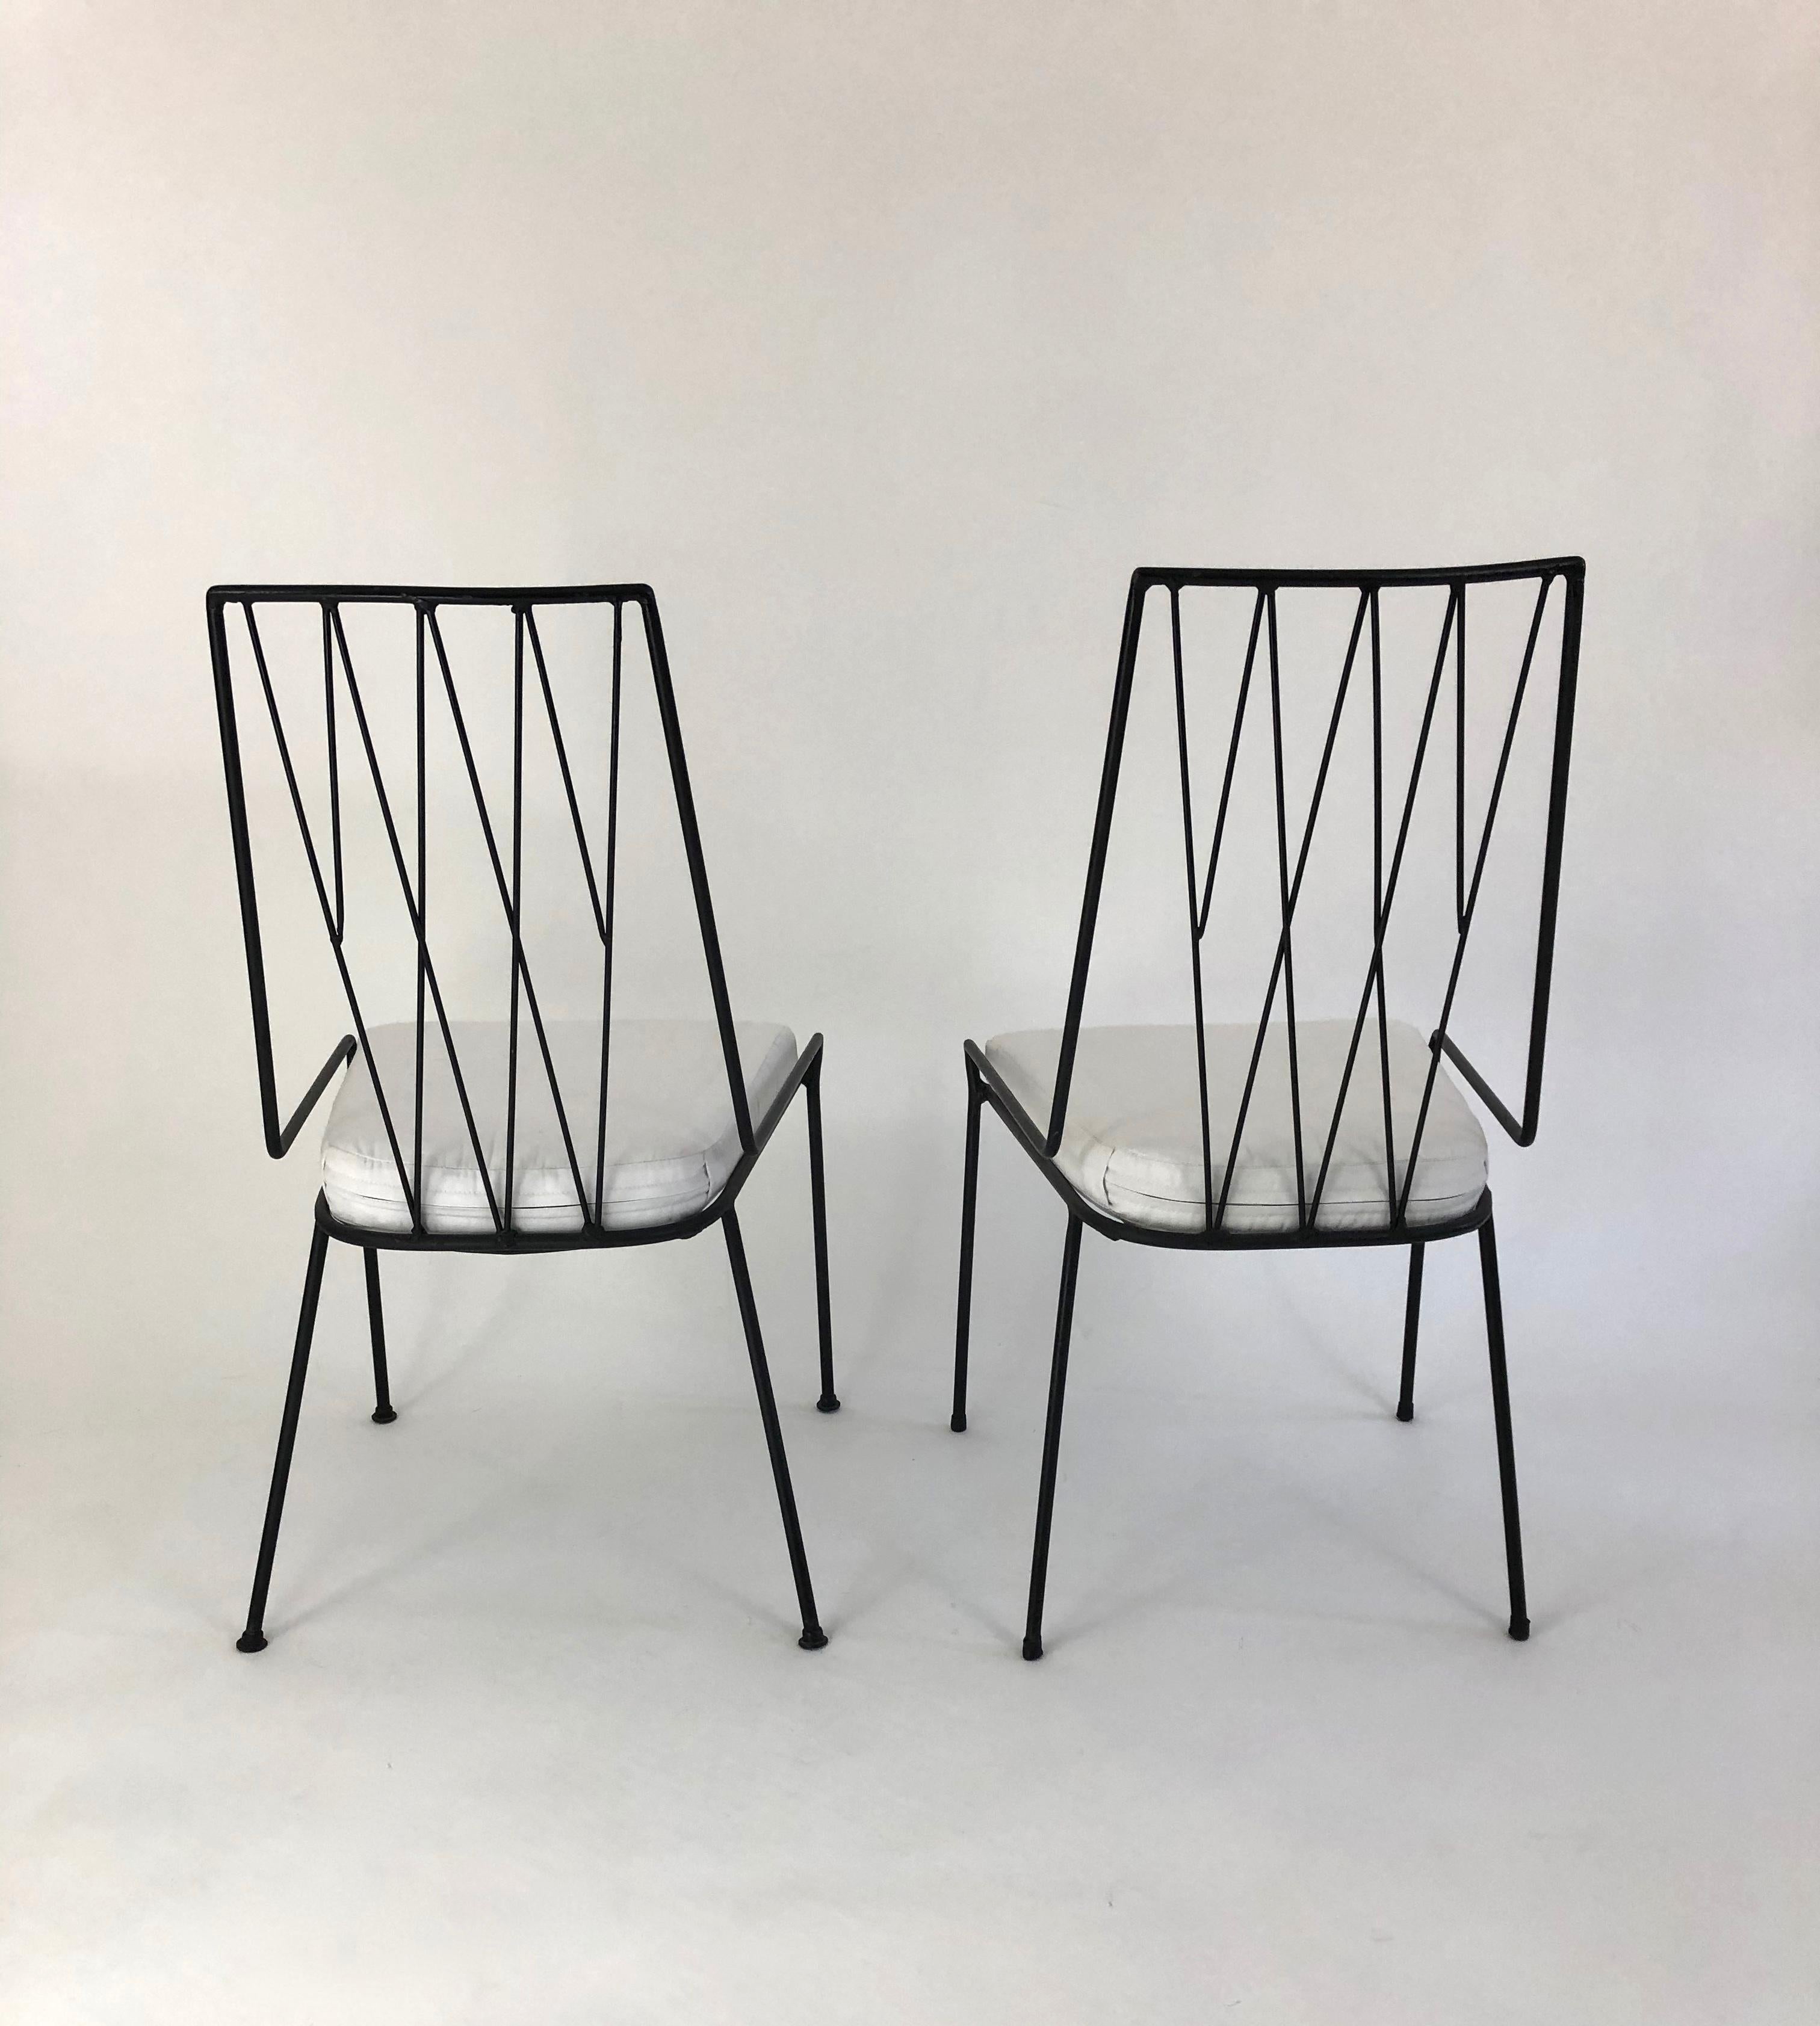 Upholstery Paul McCobb Pavilion Collection Set of Four Patio Chairs with Table, circa 1950s